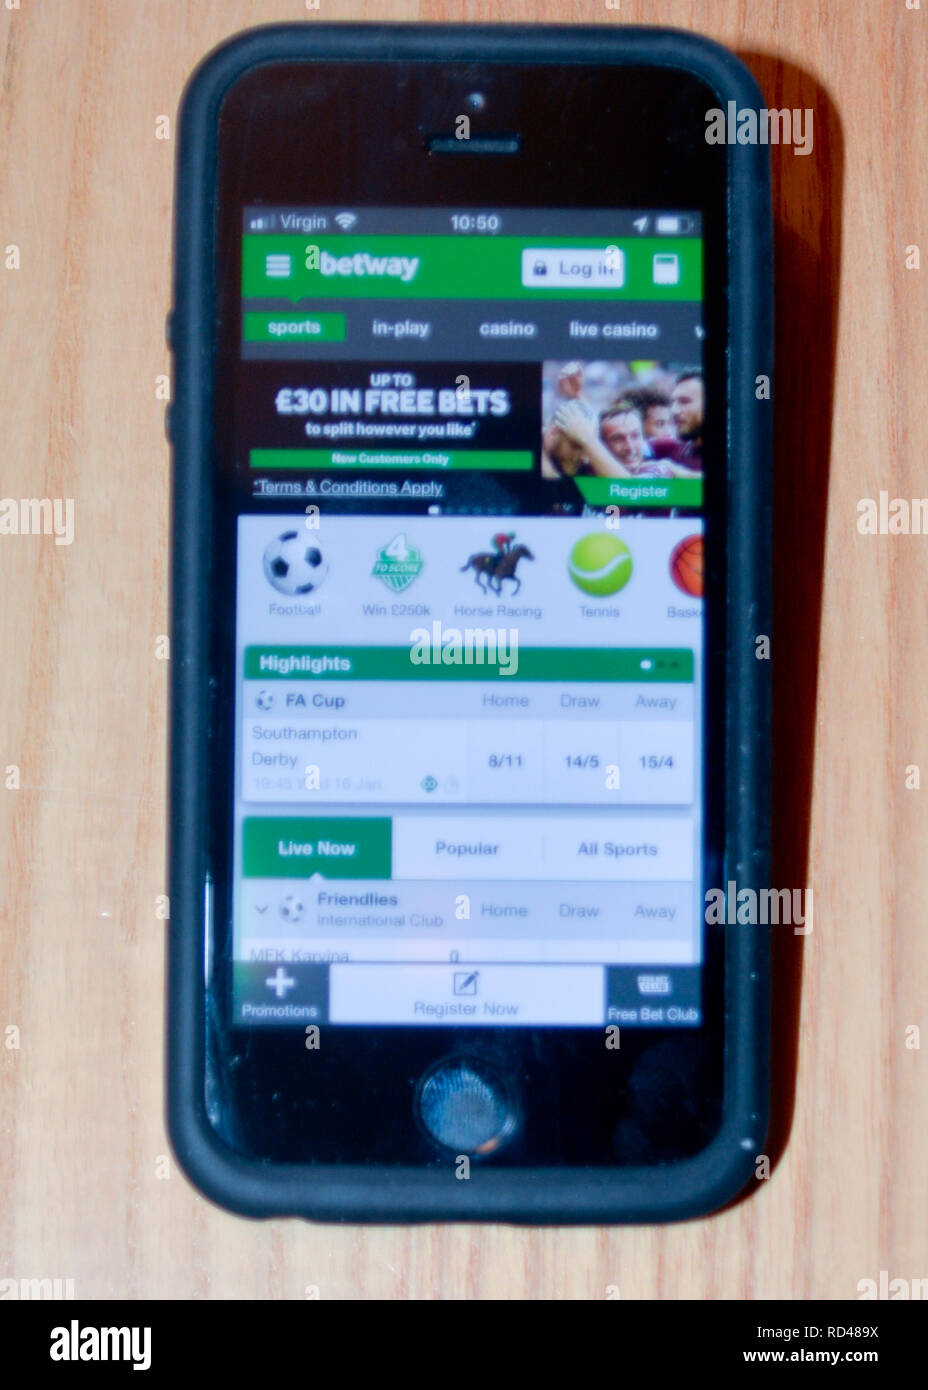 What Every download app betway Need To Know About Facebook